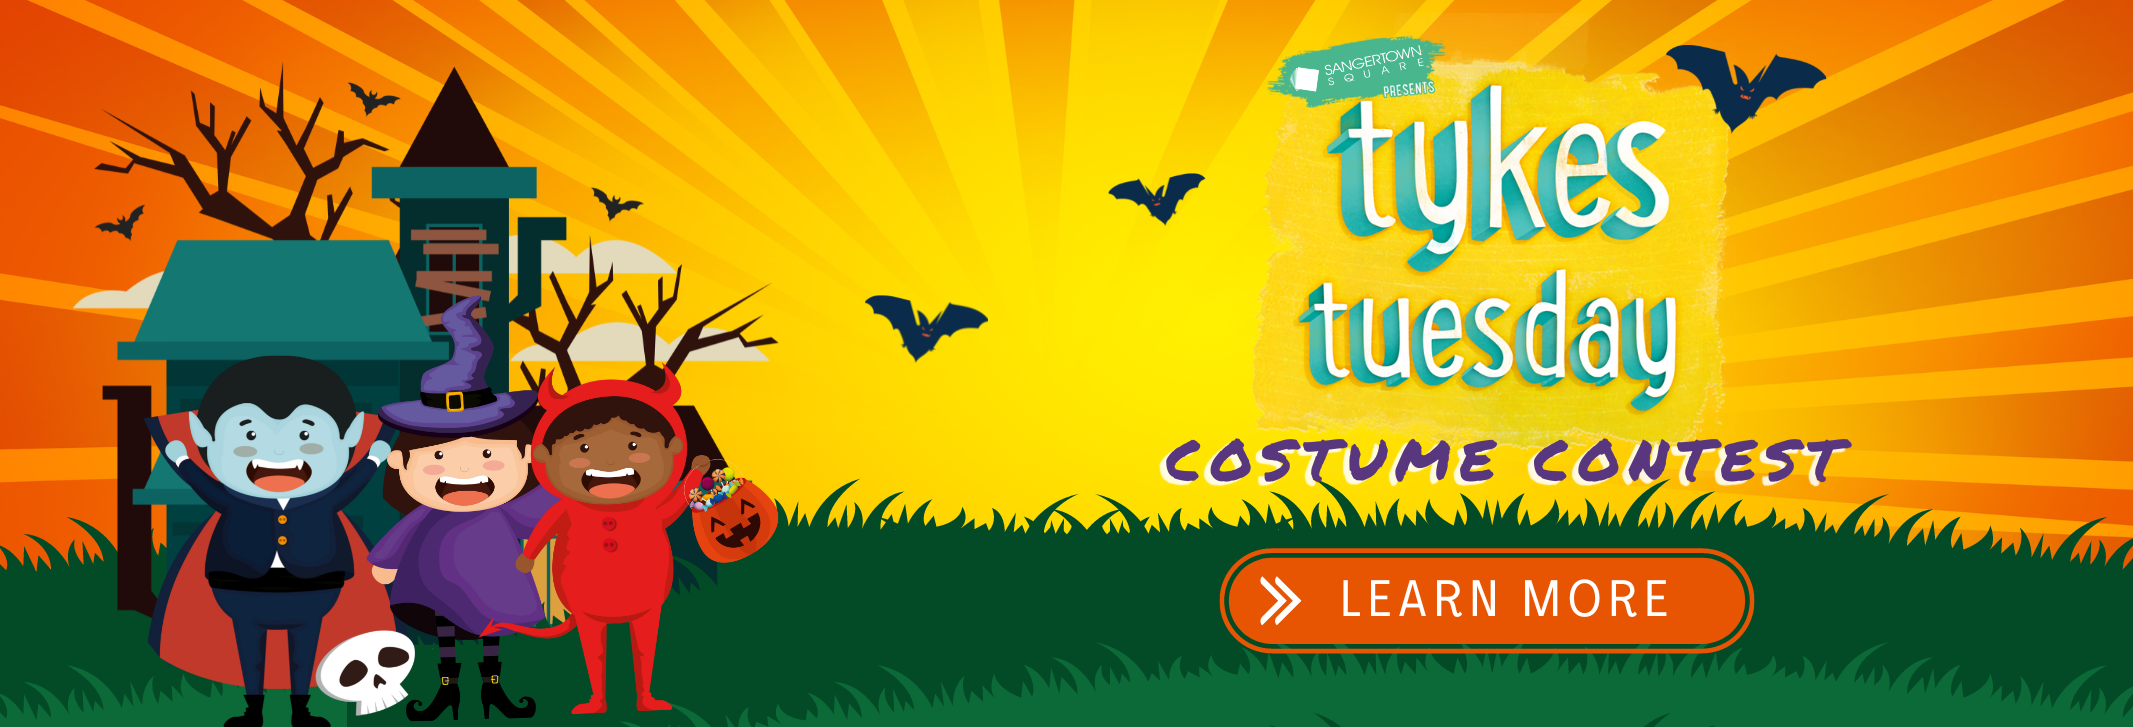 Tykes Tuesday Costume Contest Graphic